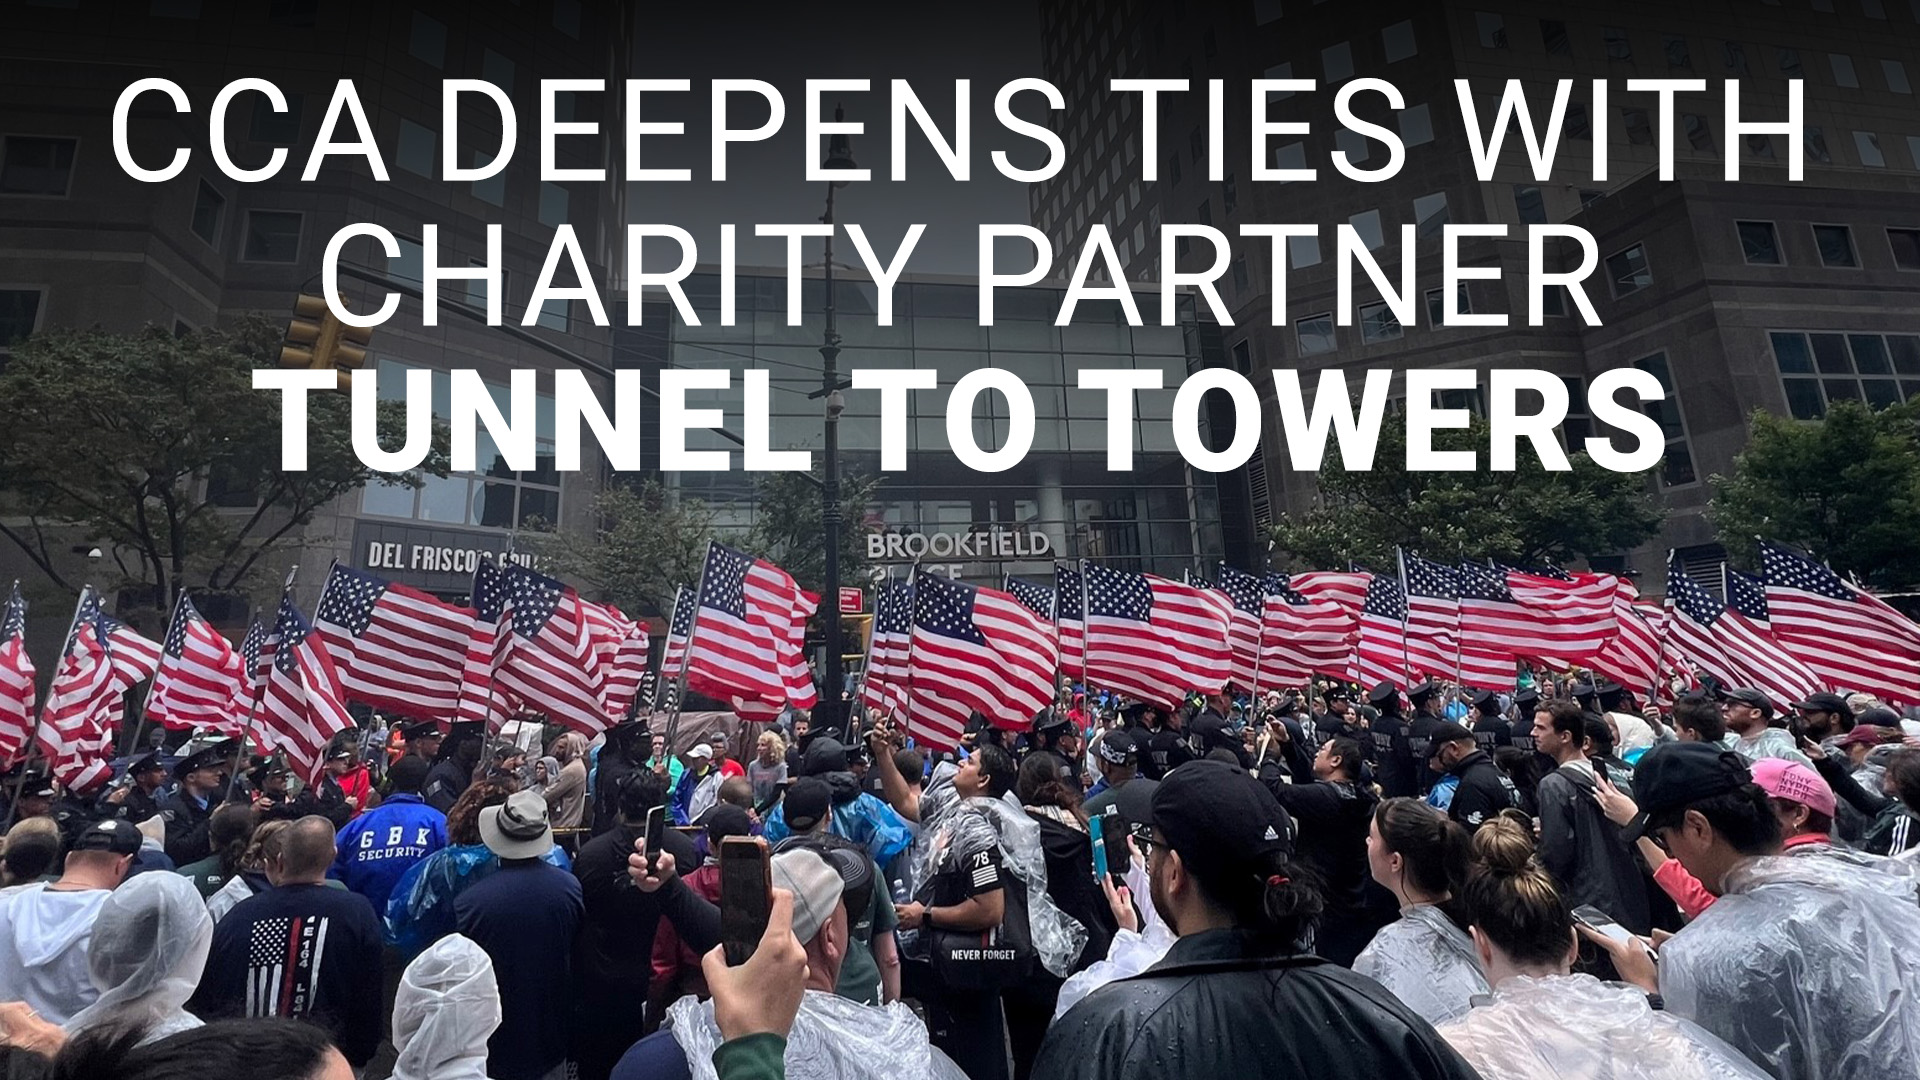 CCA deepens ties with charity partner tunnel to towers